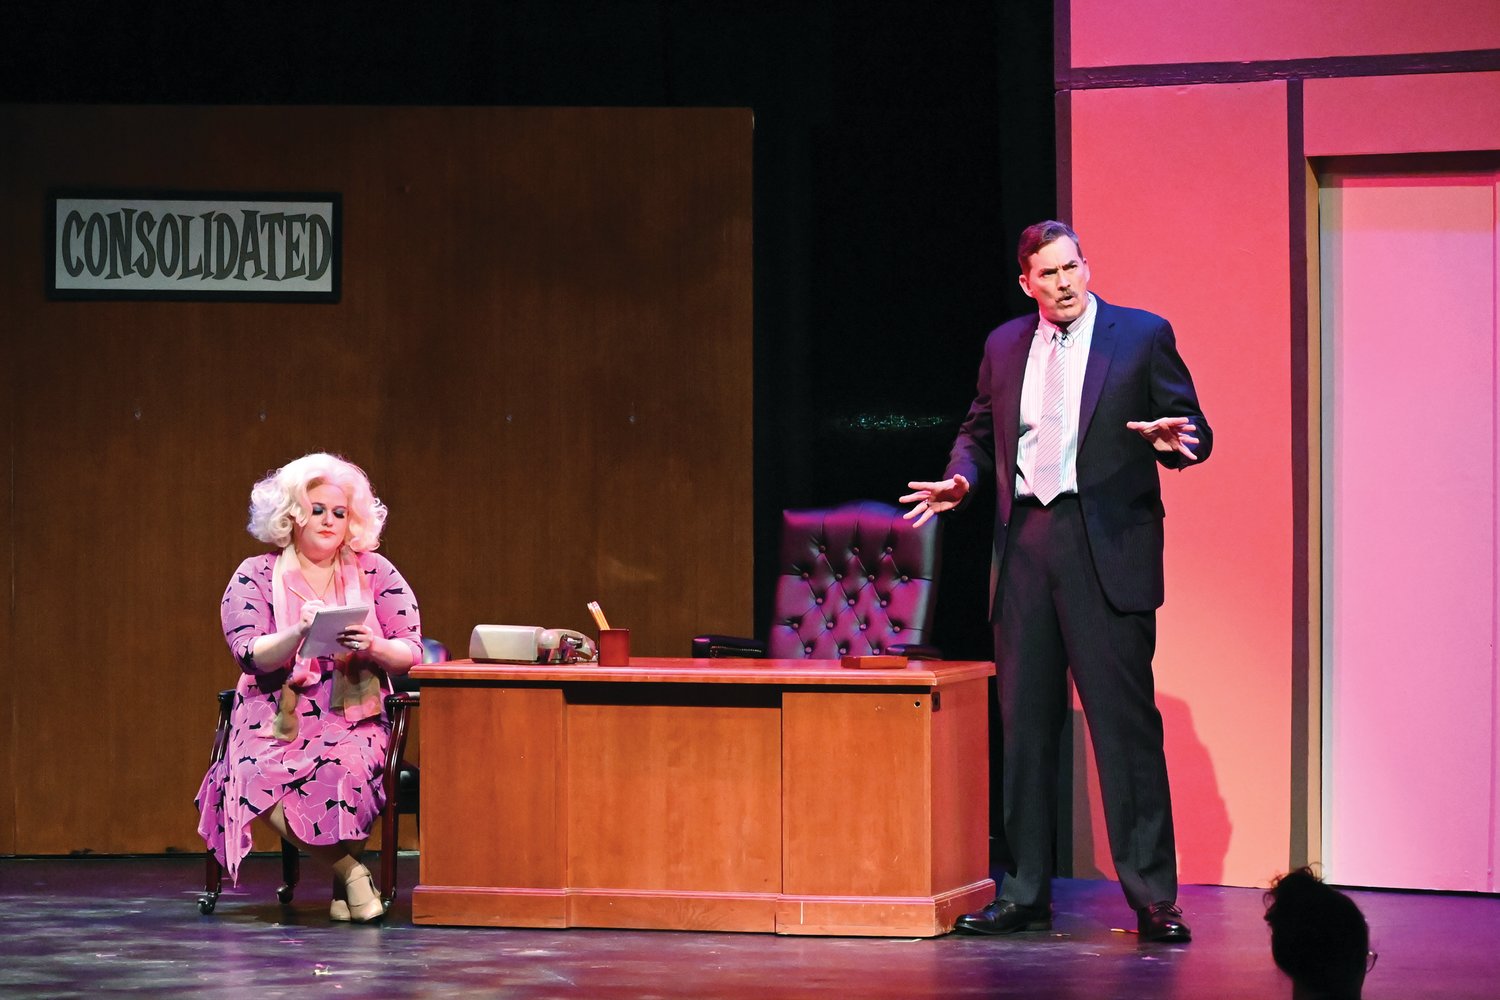 TAKING A MESSAGE: Franklin Hart (played by Ron Martin) dictates a message while secretary Doralee (played by Kaelyn Boss) records what he has to say.